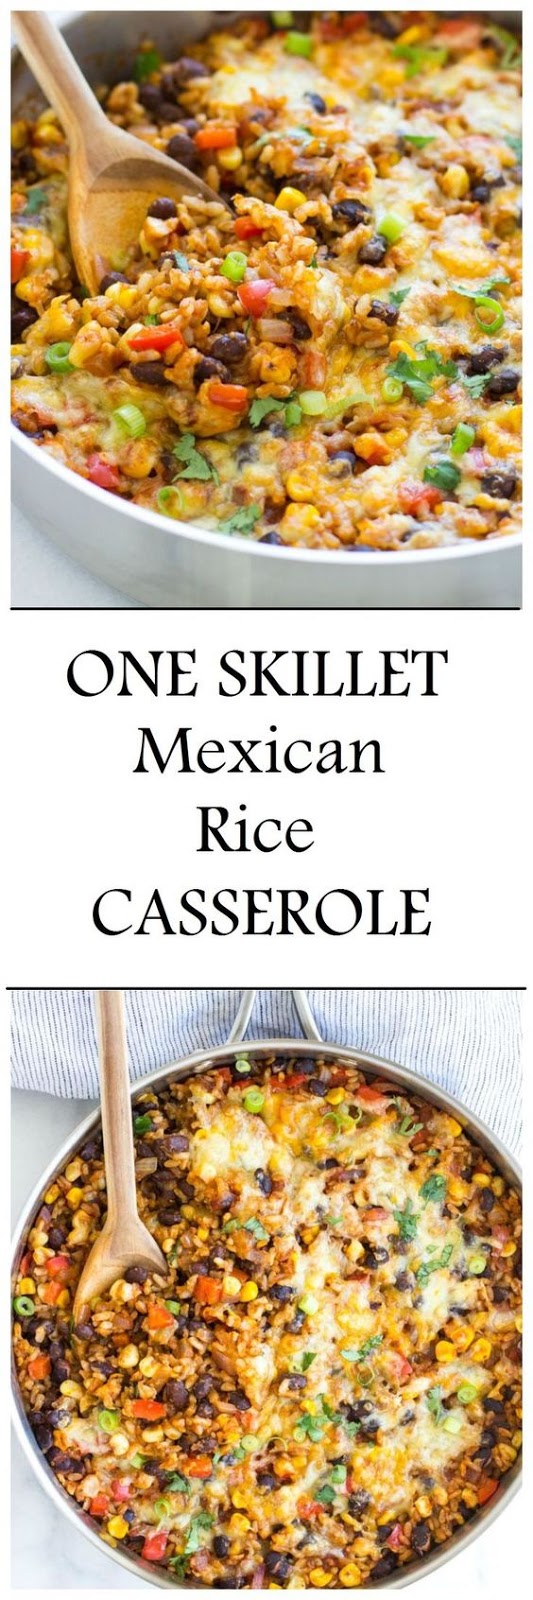  ONE SKILLET MEXICAN RICE CASSEROLE